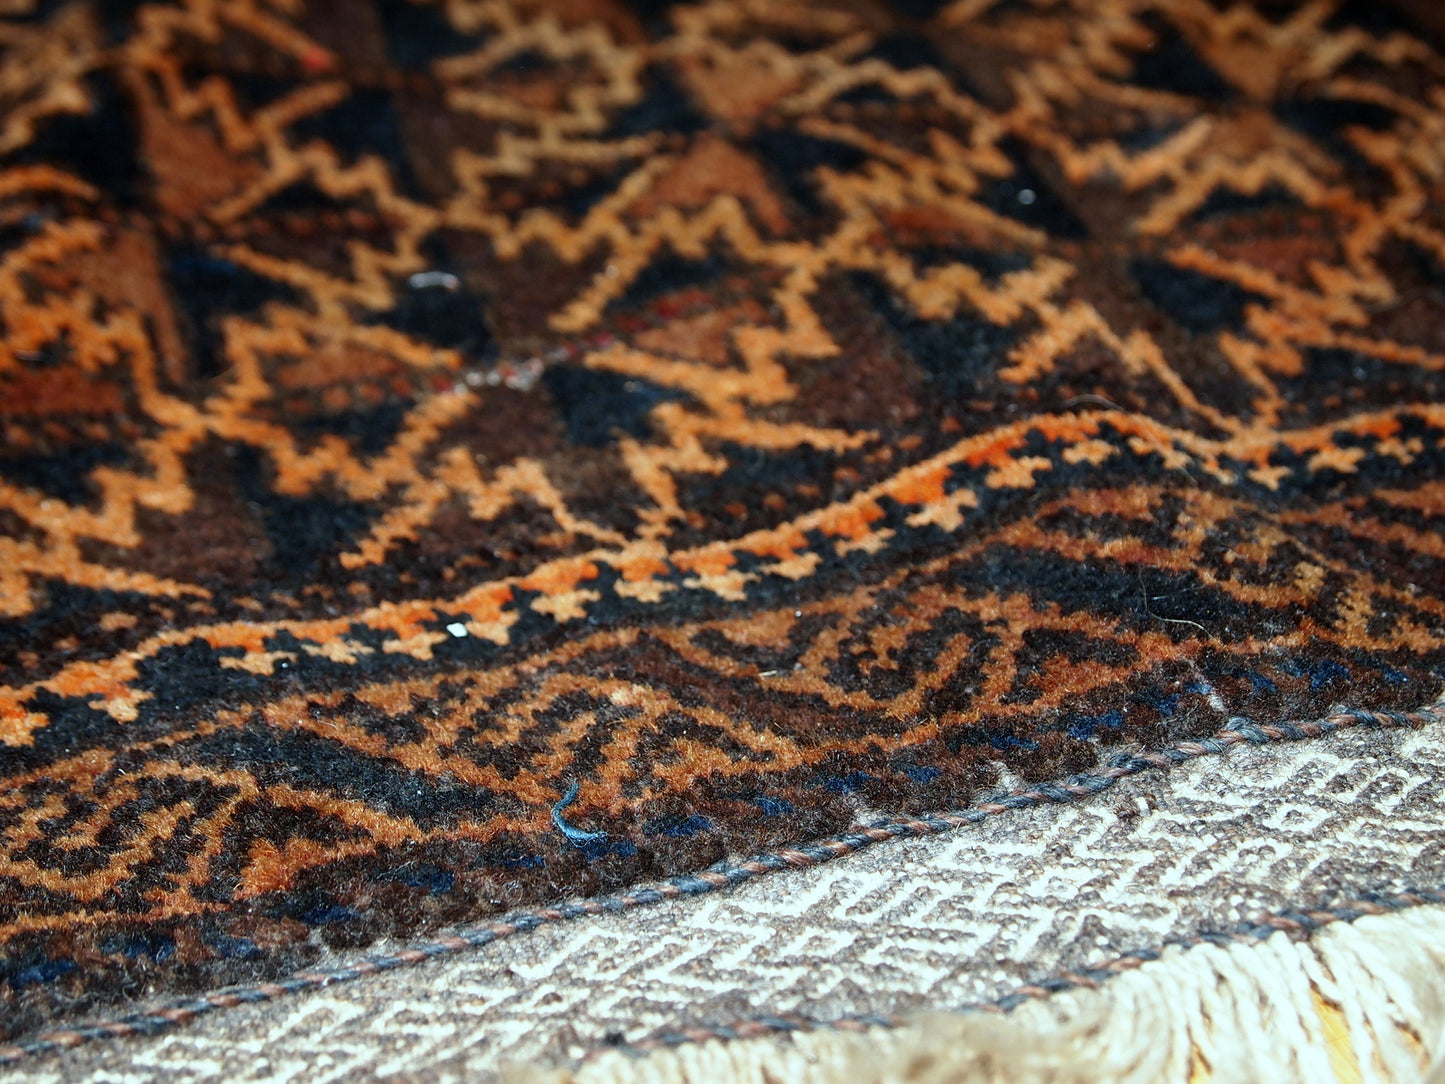 Antique hand made Afghan Baluch bag face in original condition, has some age wear and a little bit crooked. The main colors on this rug is orange, also has some different shades of brown. 